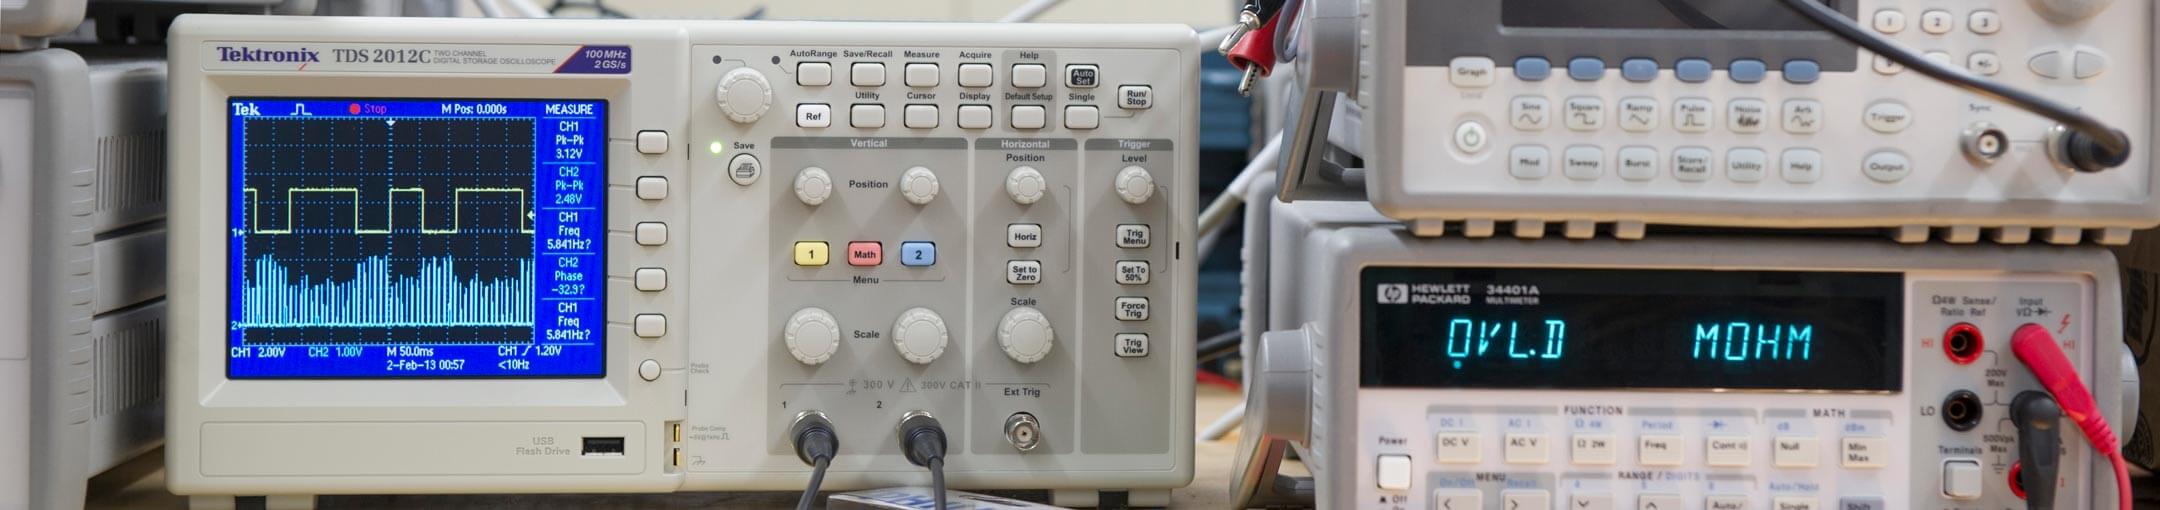 Close up of electrical euipment with displays, several buttons, and connected wires.